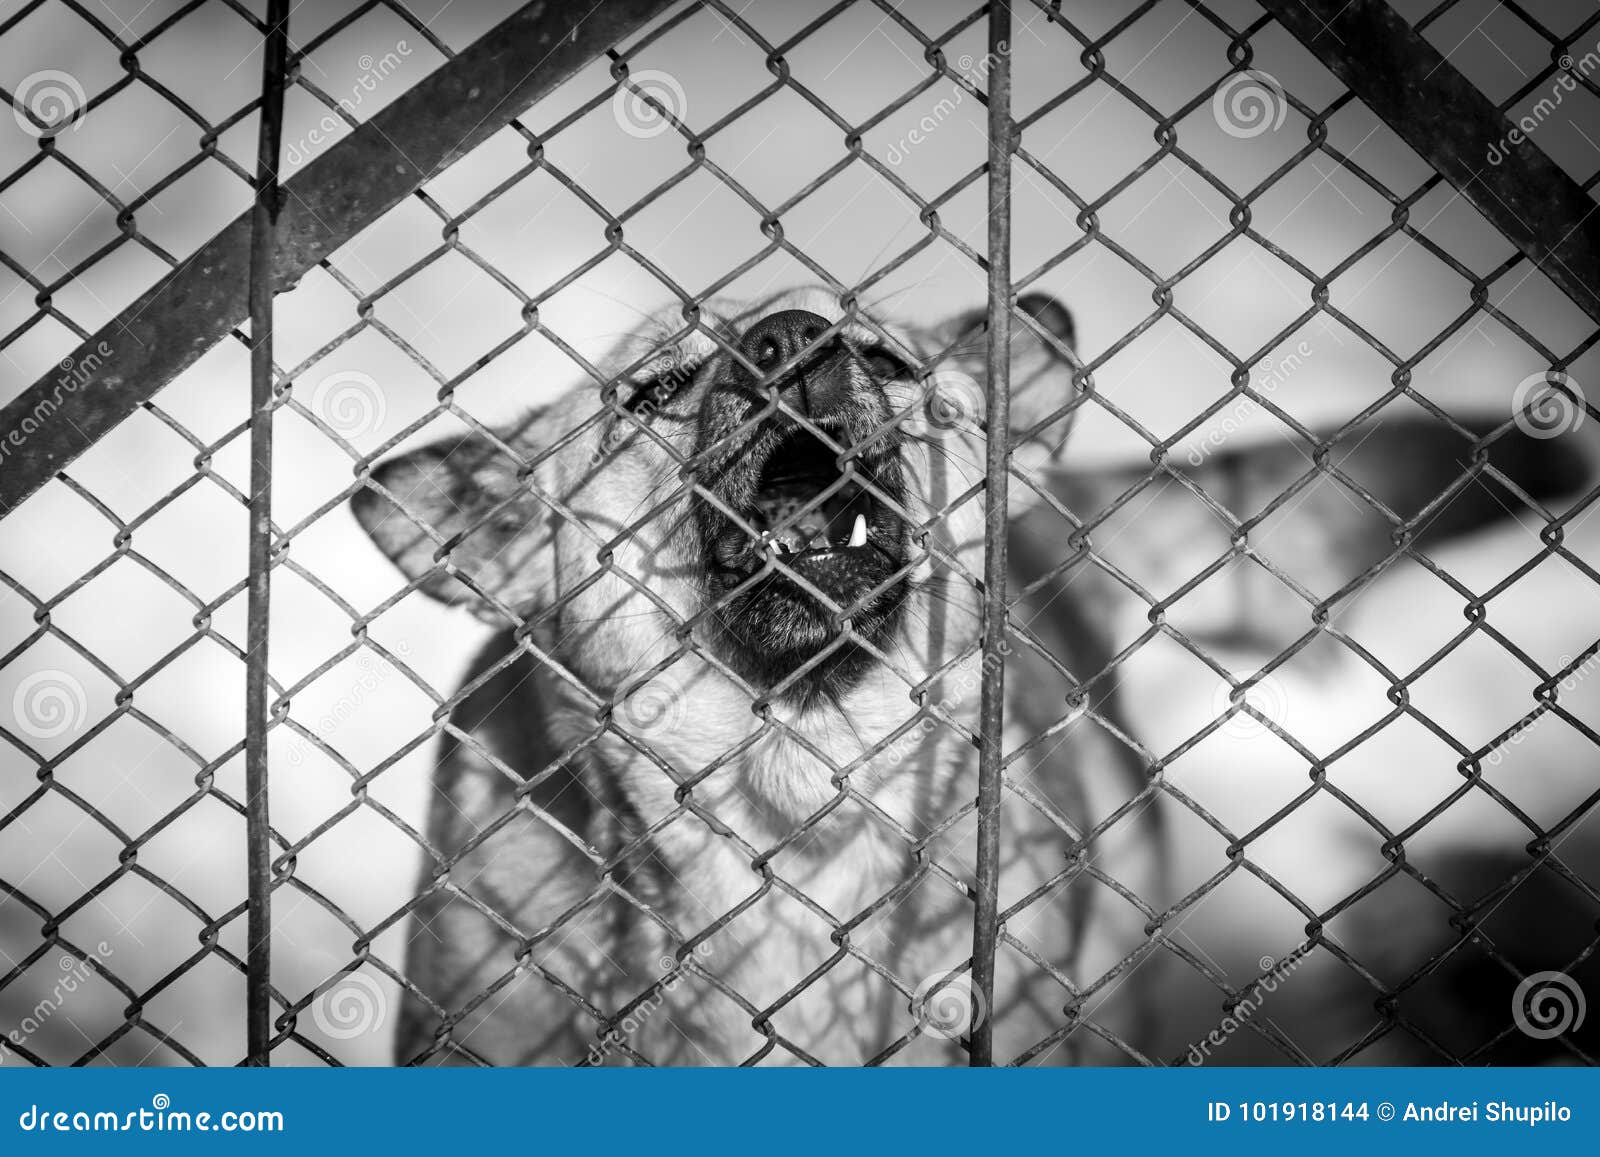 Angry dog behind a fence stock photo. Image of defend - 101918144